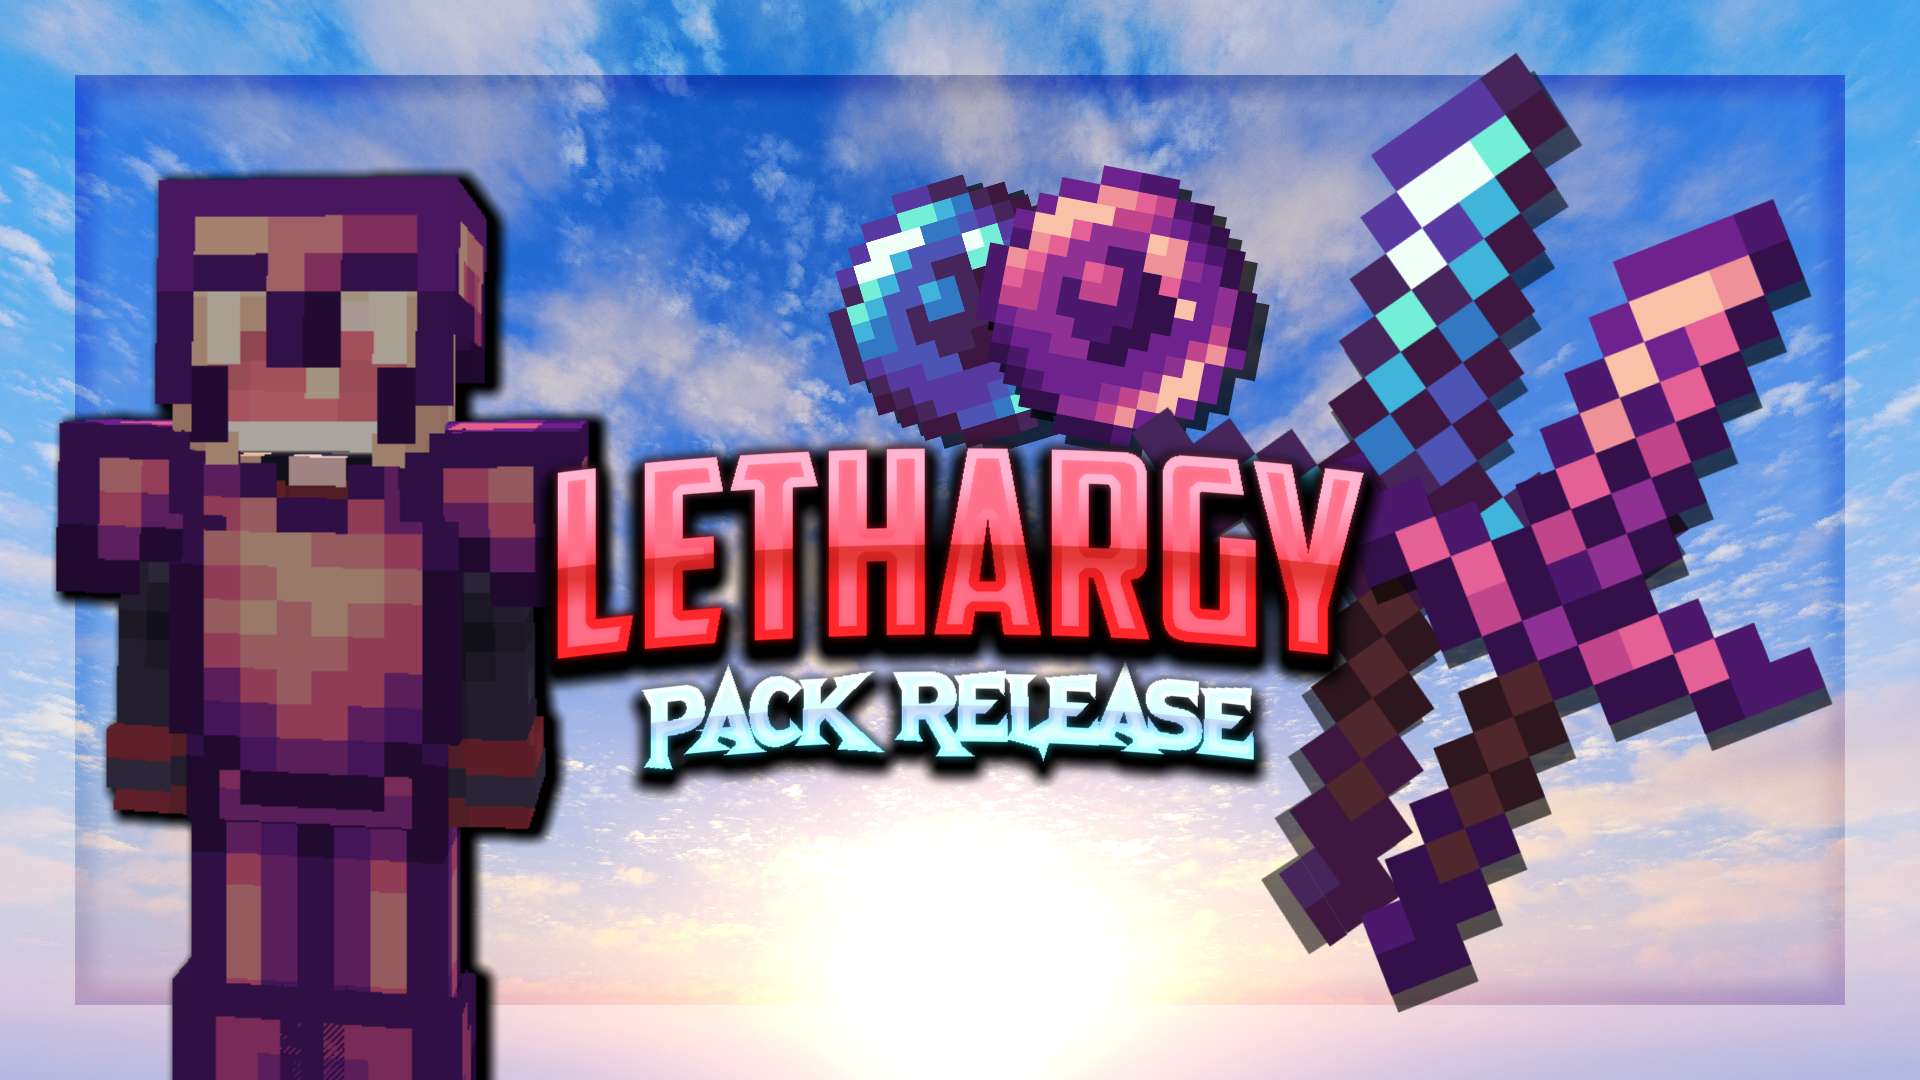 Gallery Banner for Lethargy on PvPRP